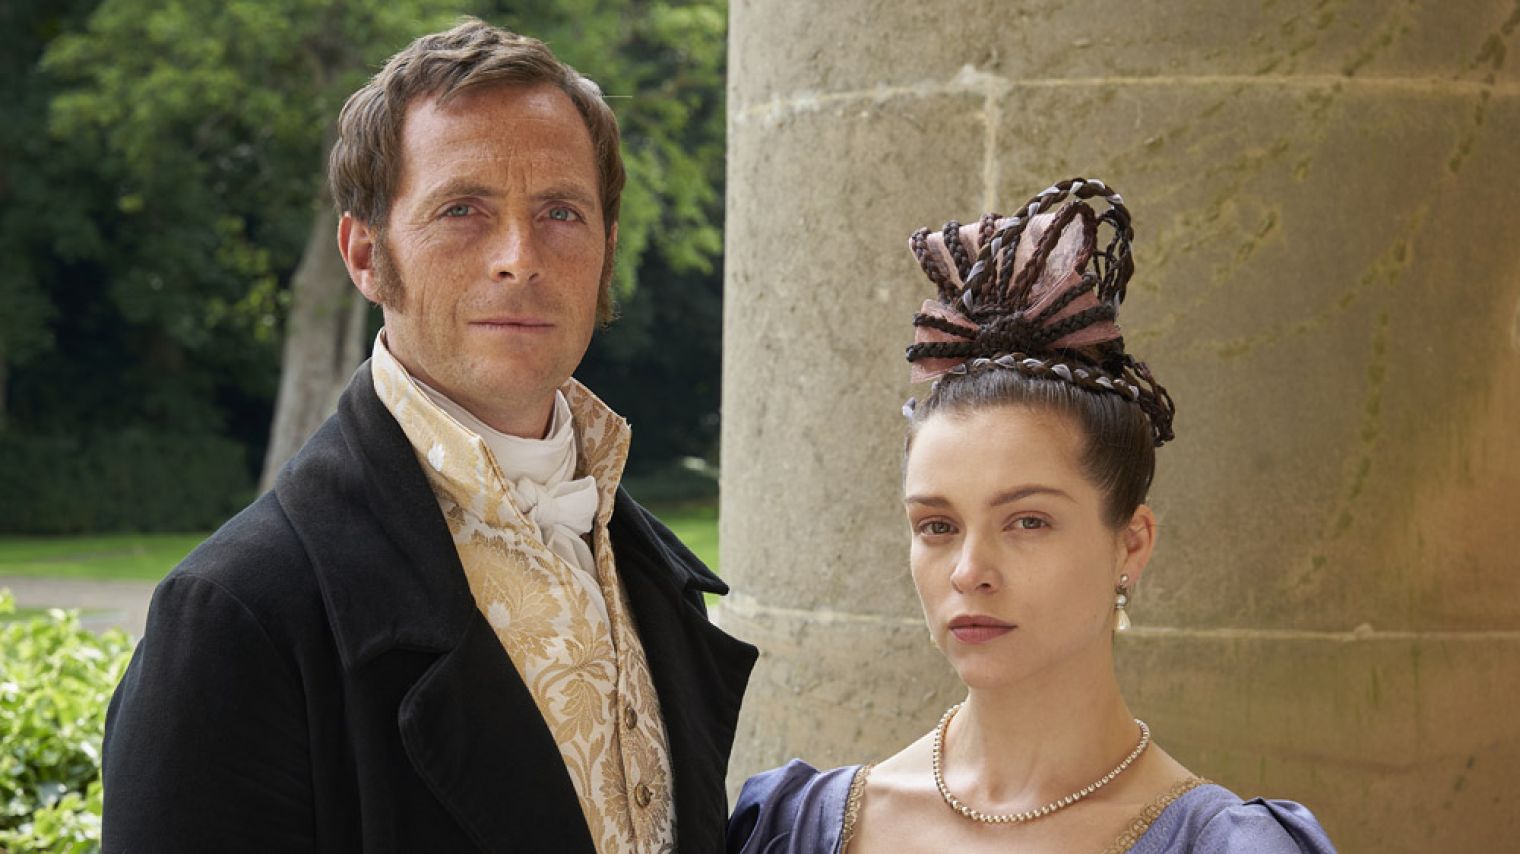 Sophie Cookson and Stephen Campbell Moore star in Georgian period drama 'The Confessions of Frannie Langton', released today on ITVX